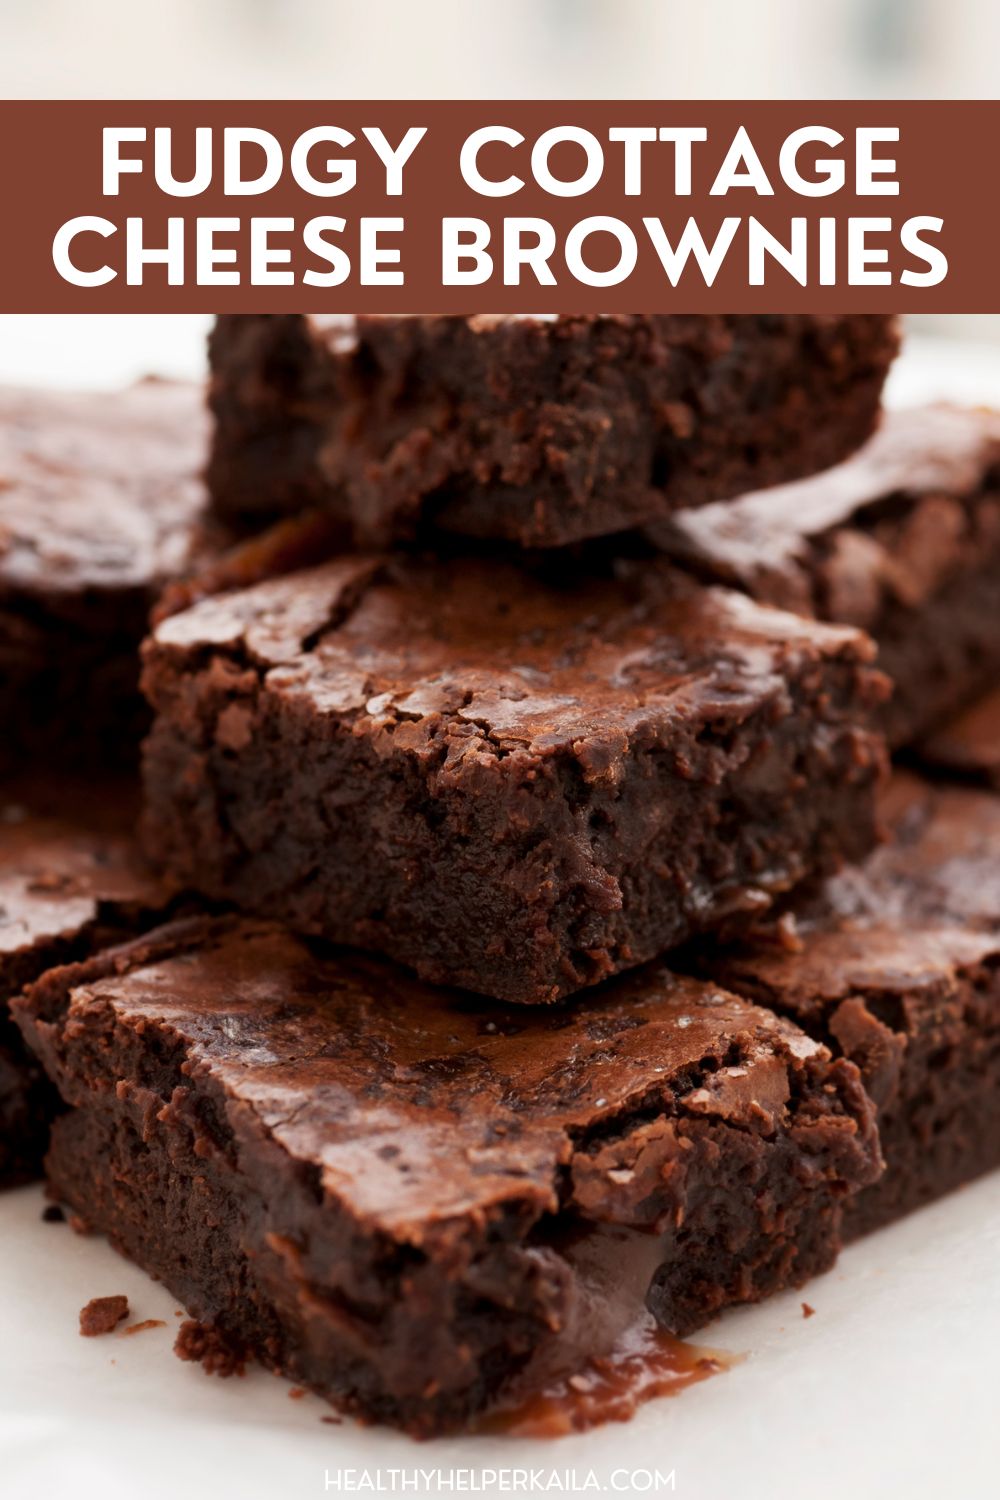 Chocolate brownies with a high protein twist thanks to cottage cheese!  These cottage cheese brownies do not contain gluten or added sugar.